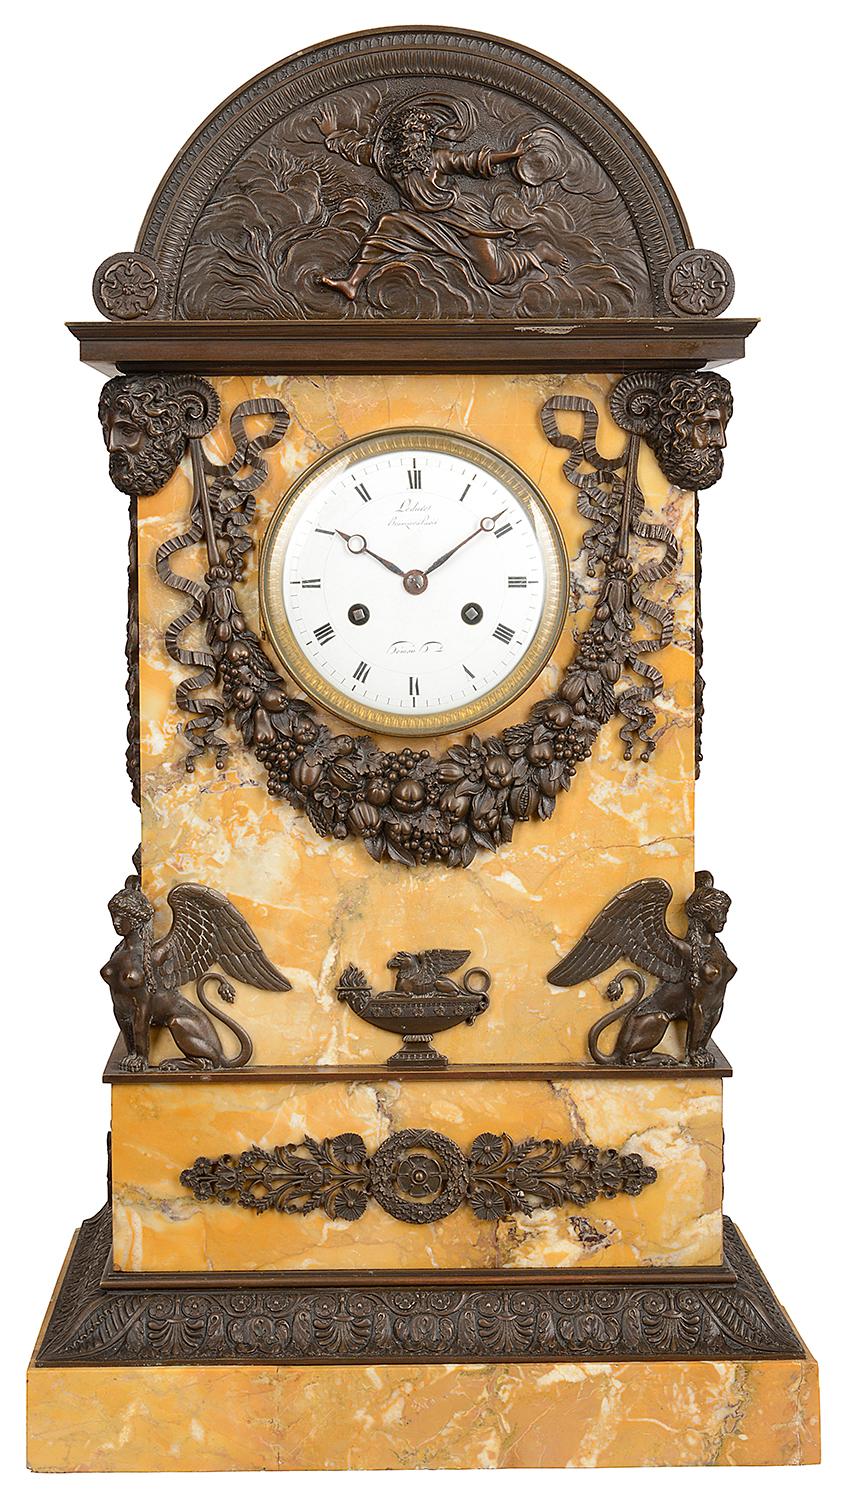 A very impressive 19th century French Sienna marble and bronze mounted Grand Tour influenced mantel clock, having an arched top, mythical gods mounted in bronze with ribbons and swags of fruit. The white enamel dial clock face with roman numerals.